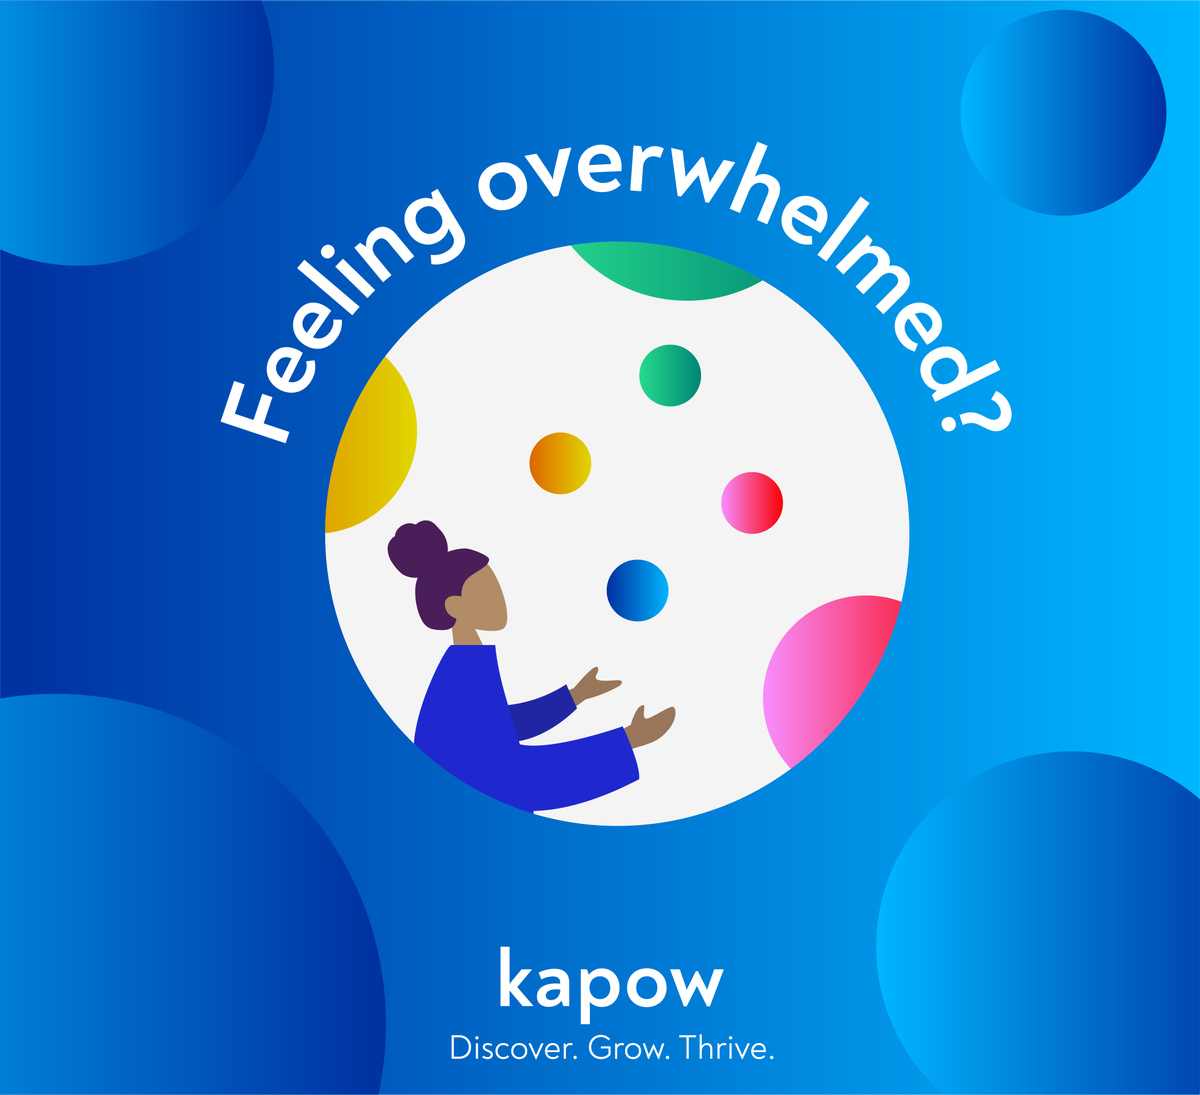 When asked to identify the symptoms of #burnout 85% of UK adults correctly identified feeling overwhelmed as a common symptom. How do leaders, teams and people keep a real-time pulse on this threat, and snuff out burnout? broadleafglobal.net/kapow #ThePowerOfHow #BurnoutPrevention